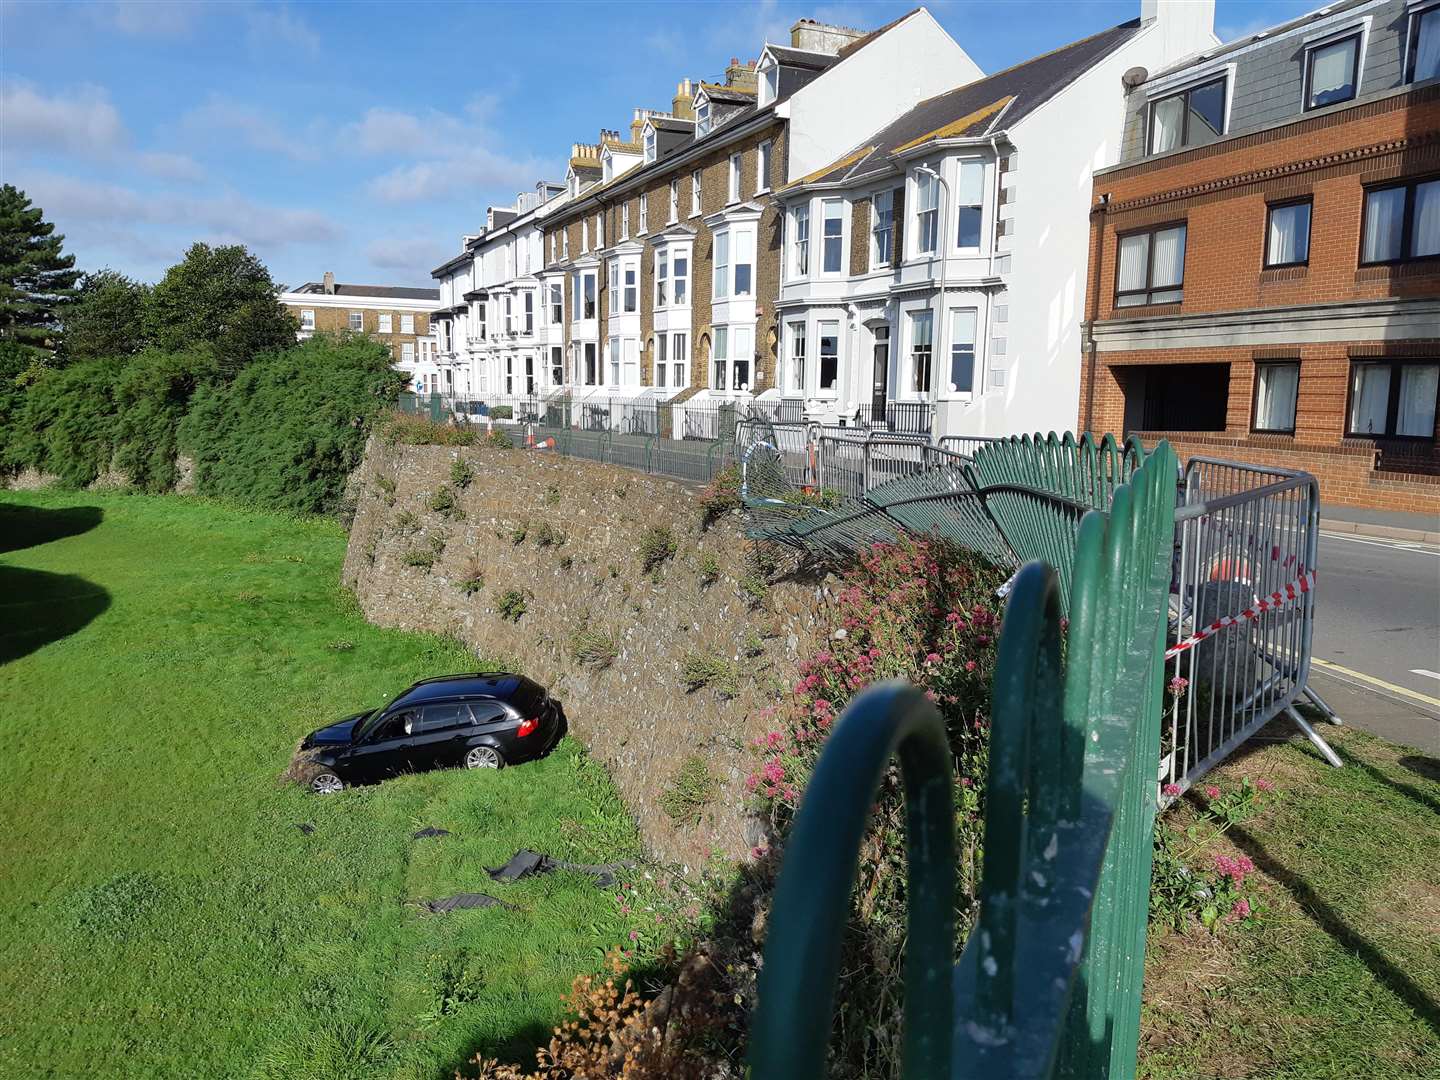 A black BMW plunged into the moat of Deal Castle after reportedly swerving to avoid pedestrians